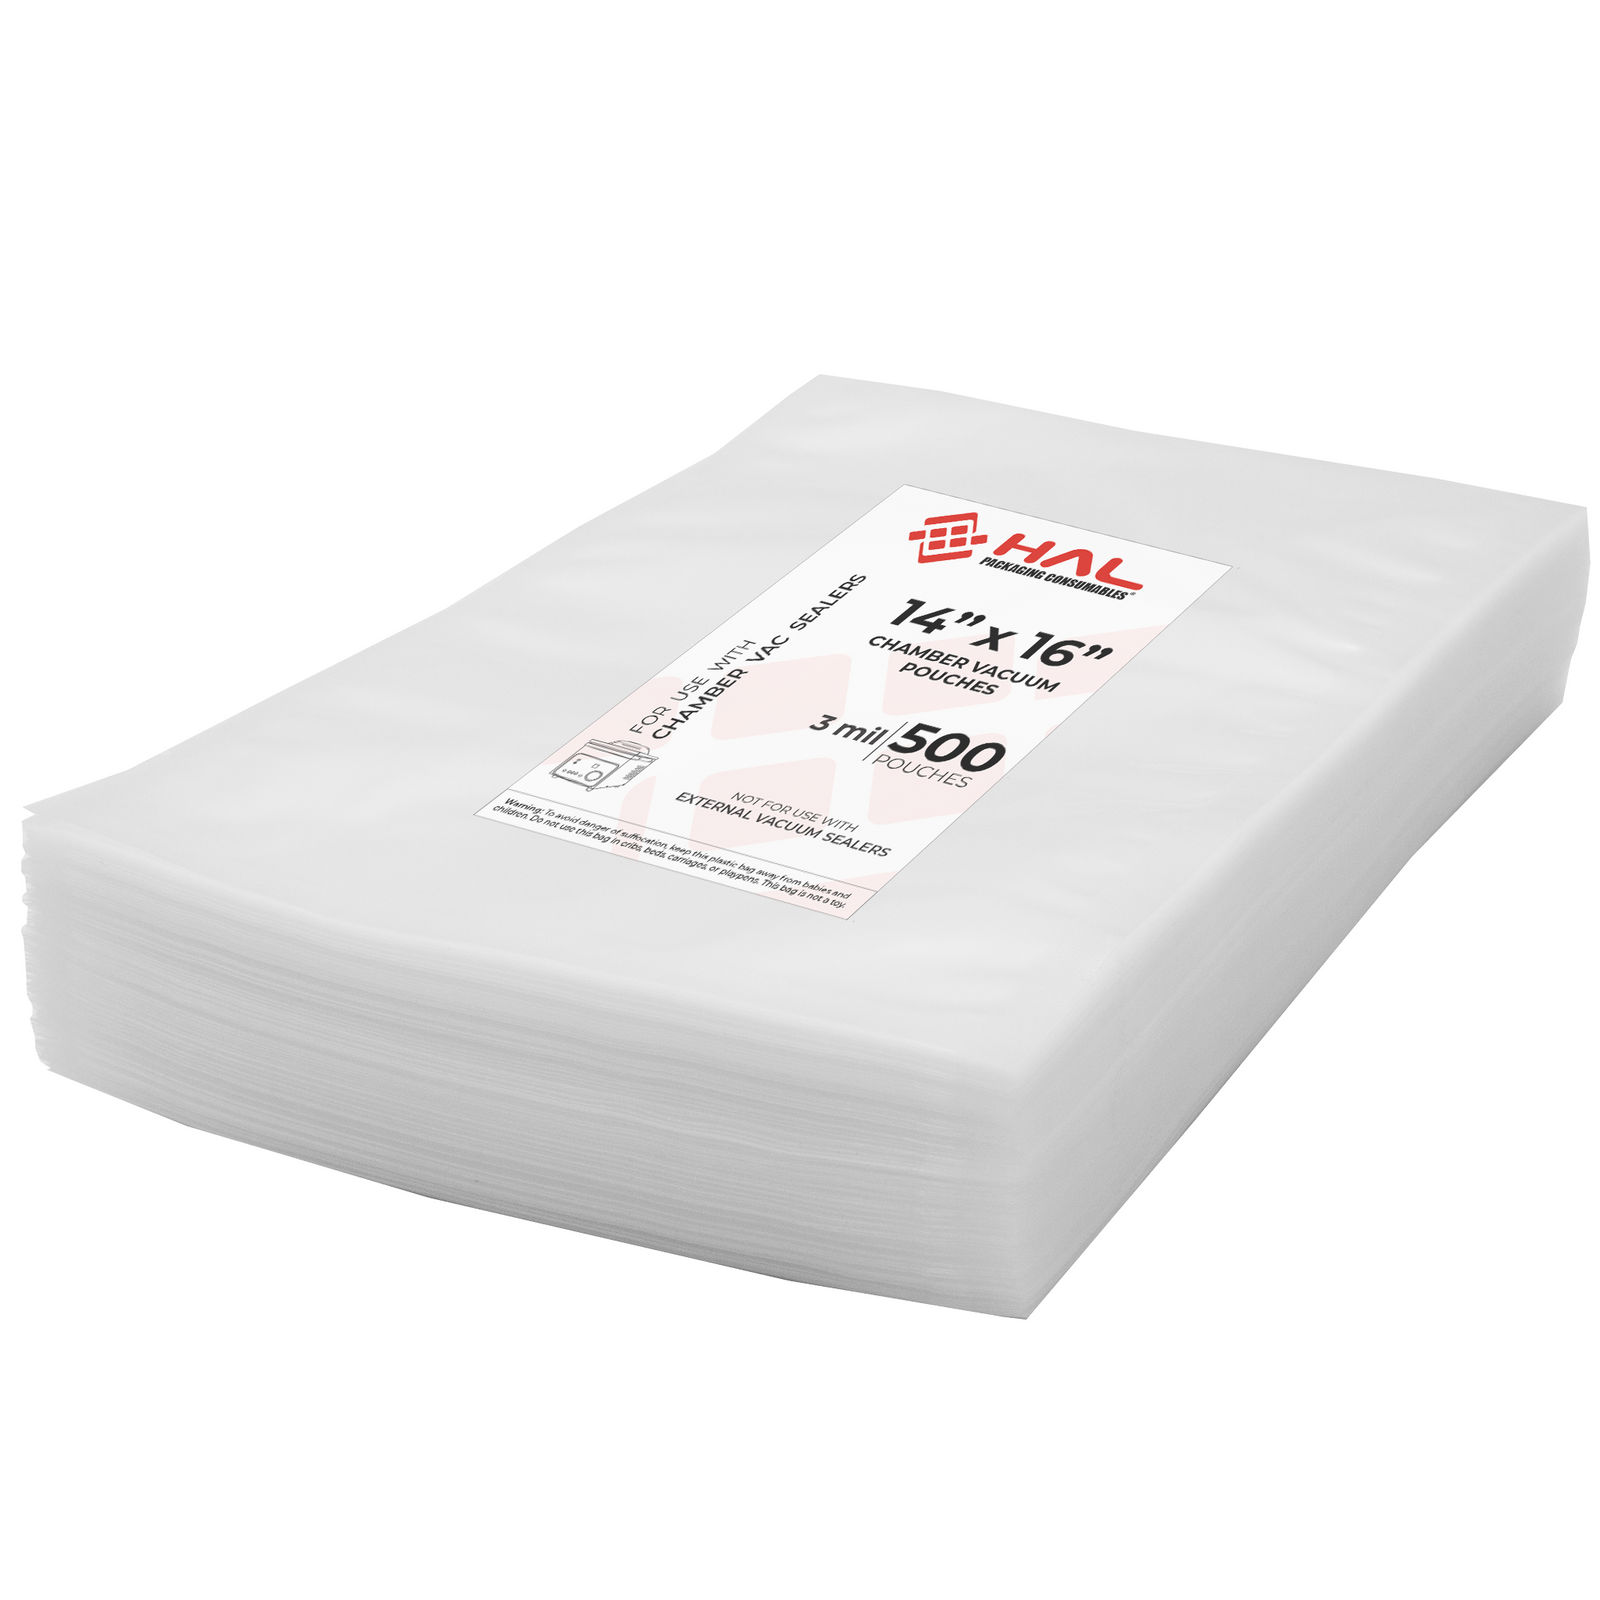 Embossed Vacuum Sealer Bags – 100 Units - 08x12 by Hal Packaging Consumables